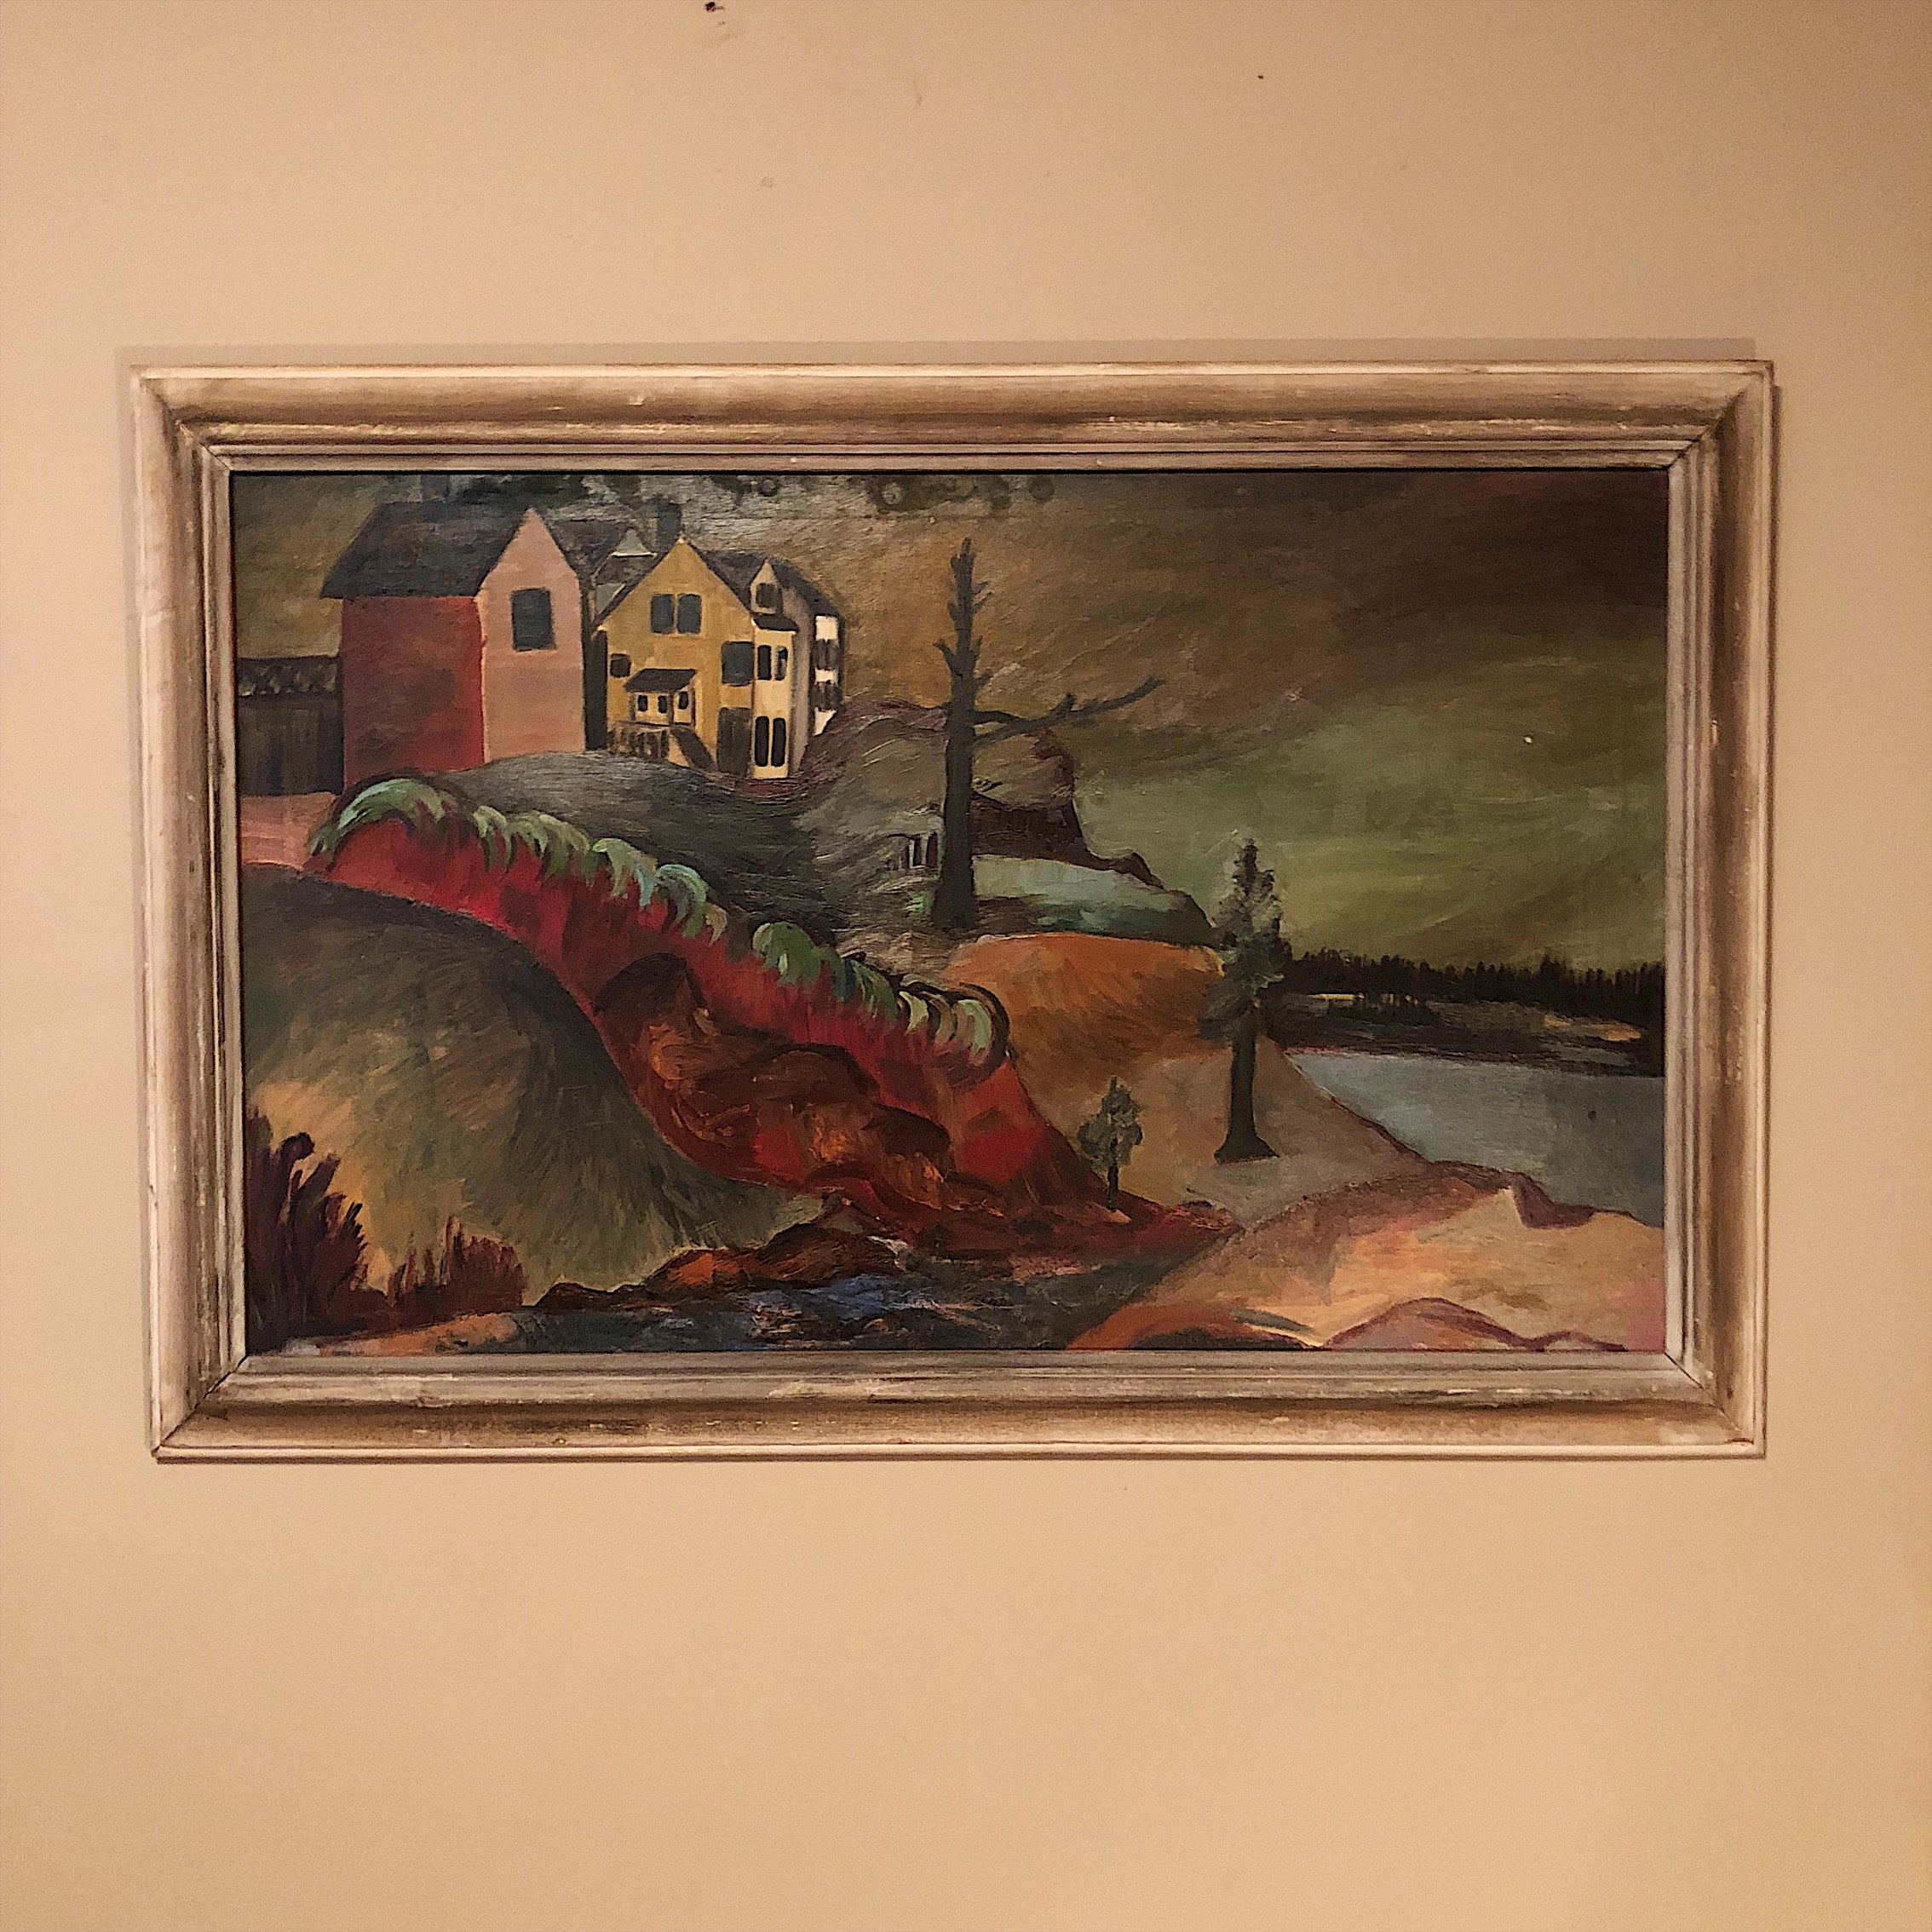 WPA Era Painting of Waterfront Landscape - New Deal - Large Oil on Canvas - Mystery Artist - Depression Era - 43 x 29